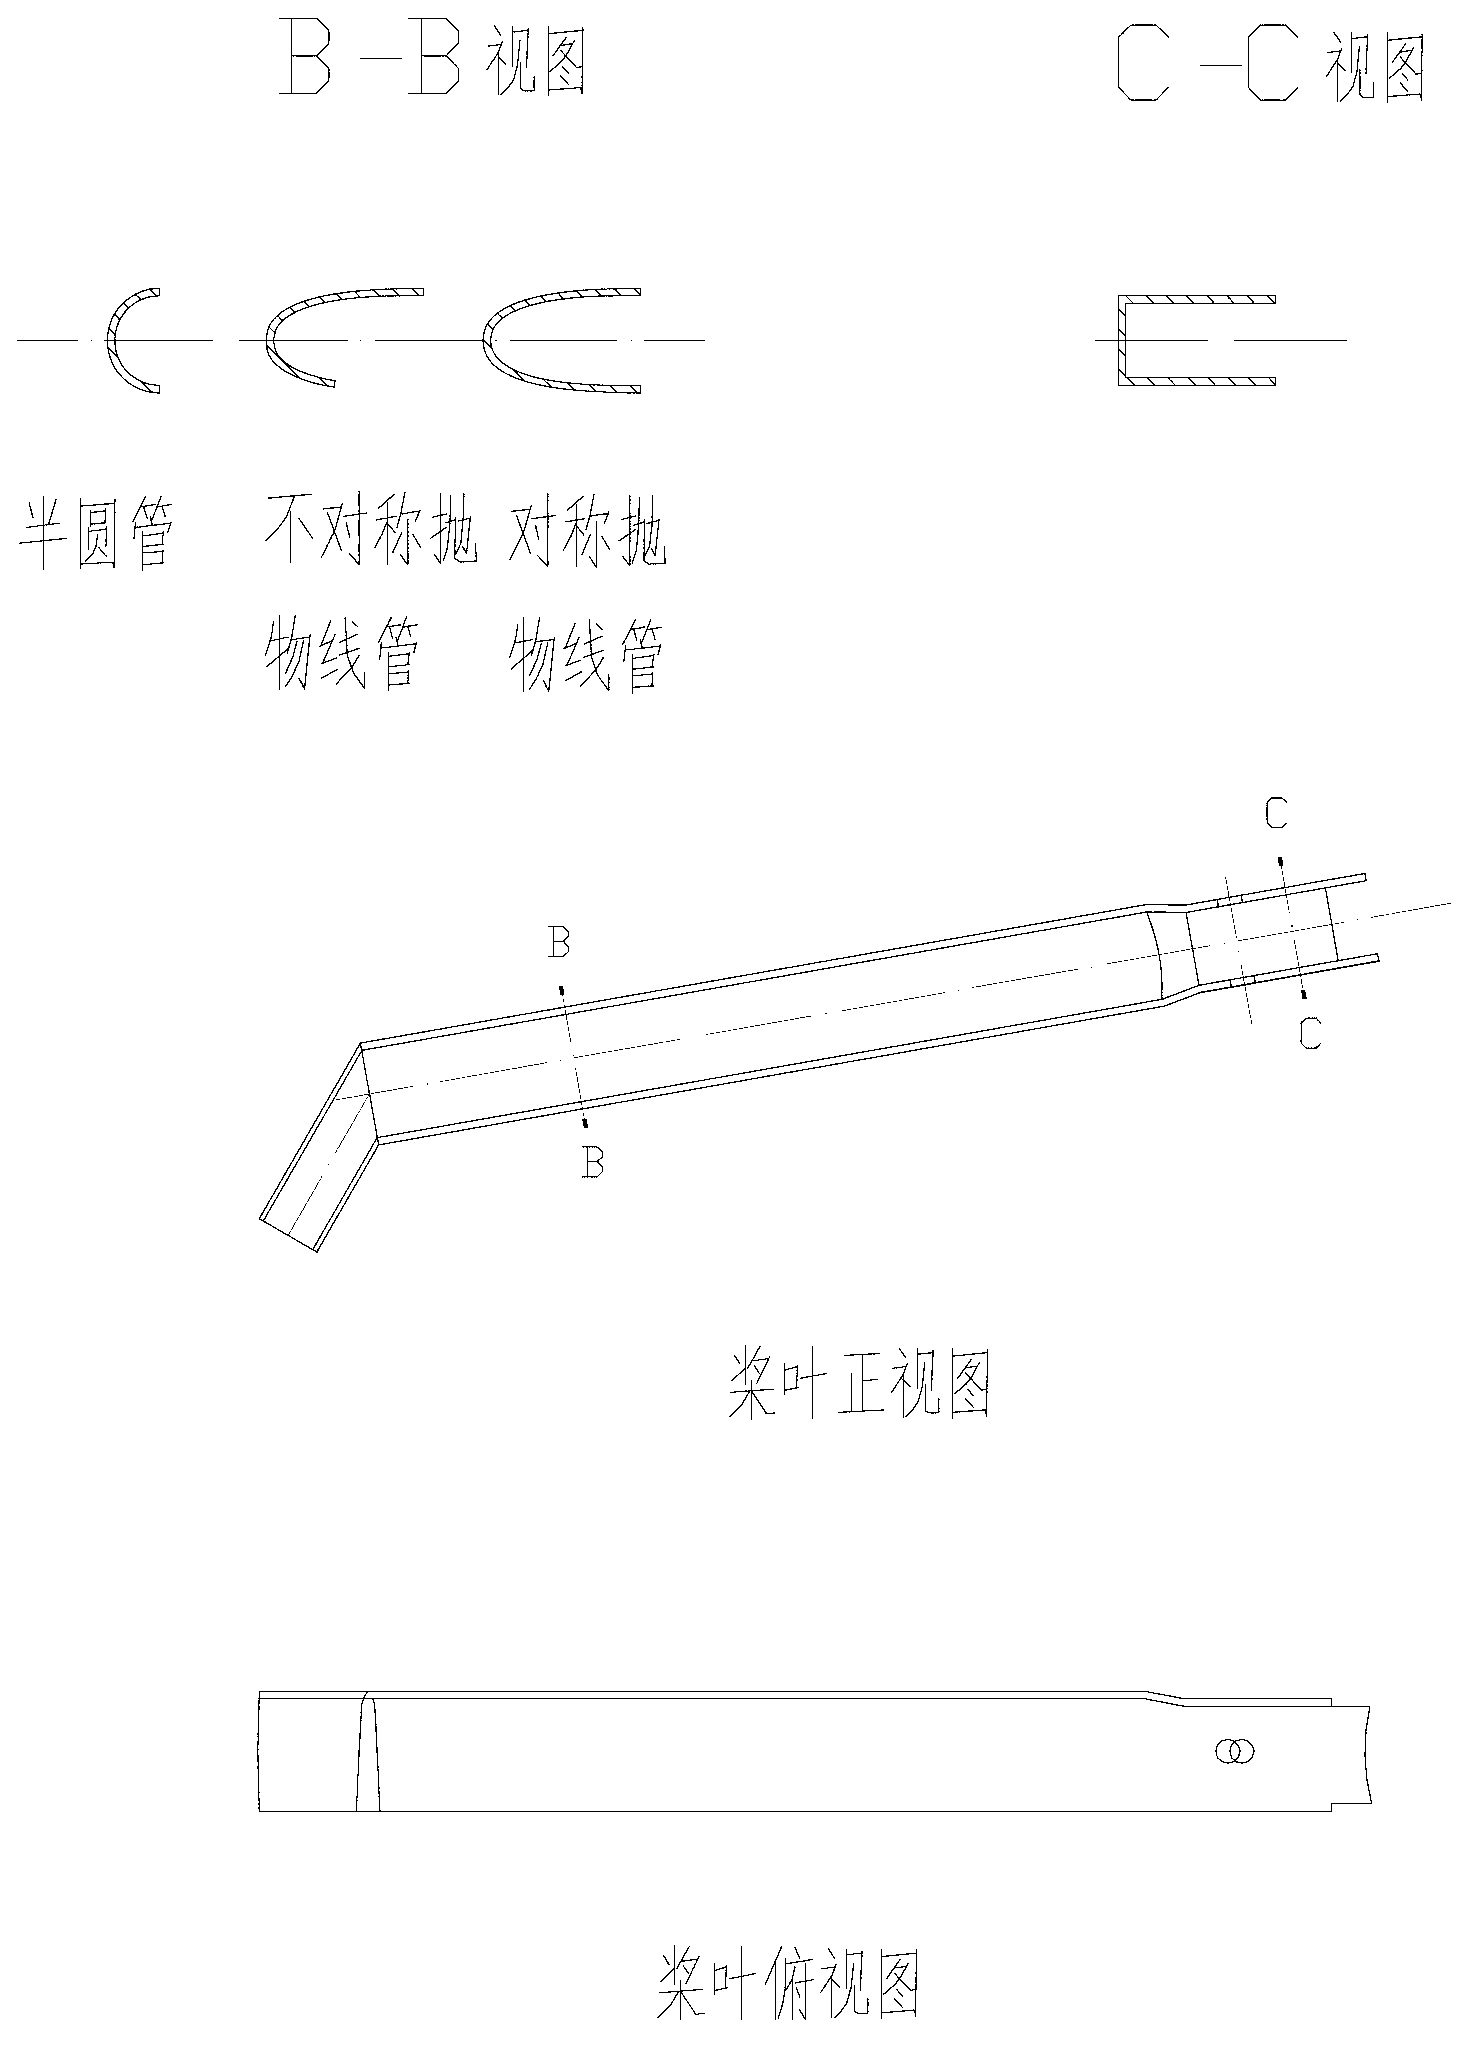 Mechanical defoaming device applied to stirred tank reactor